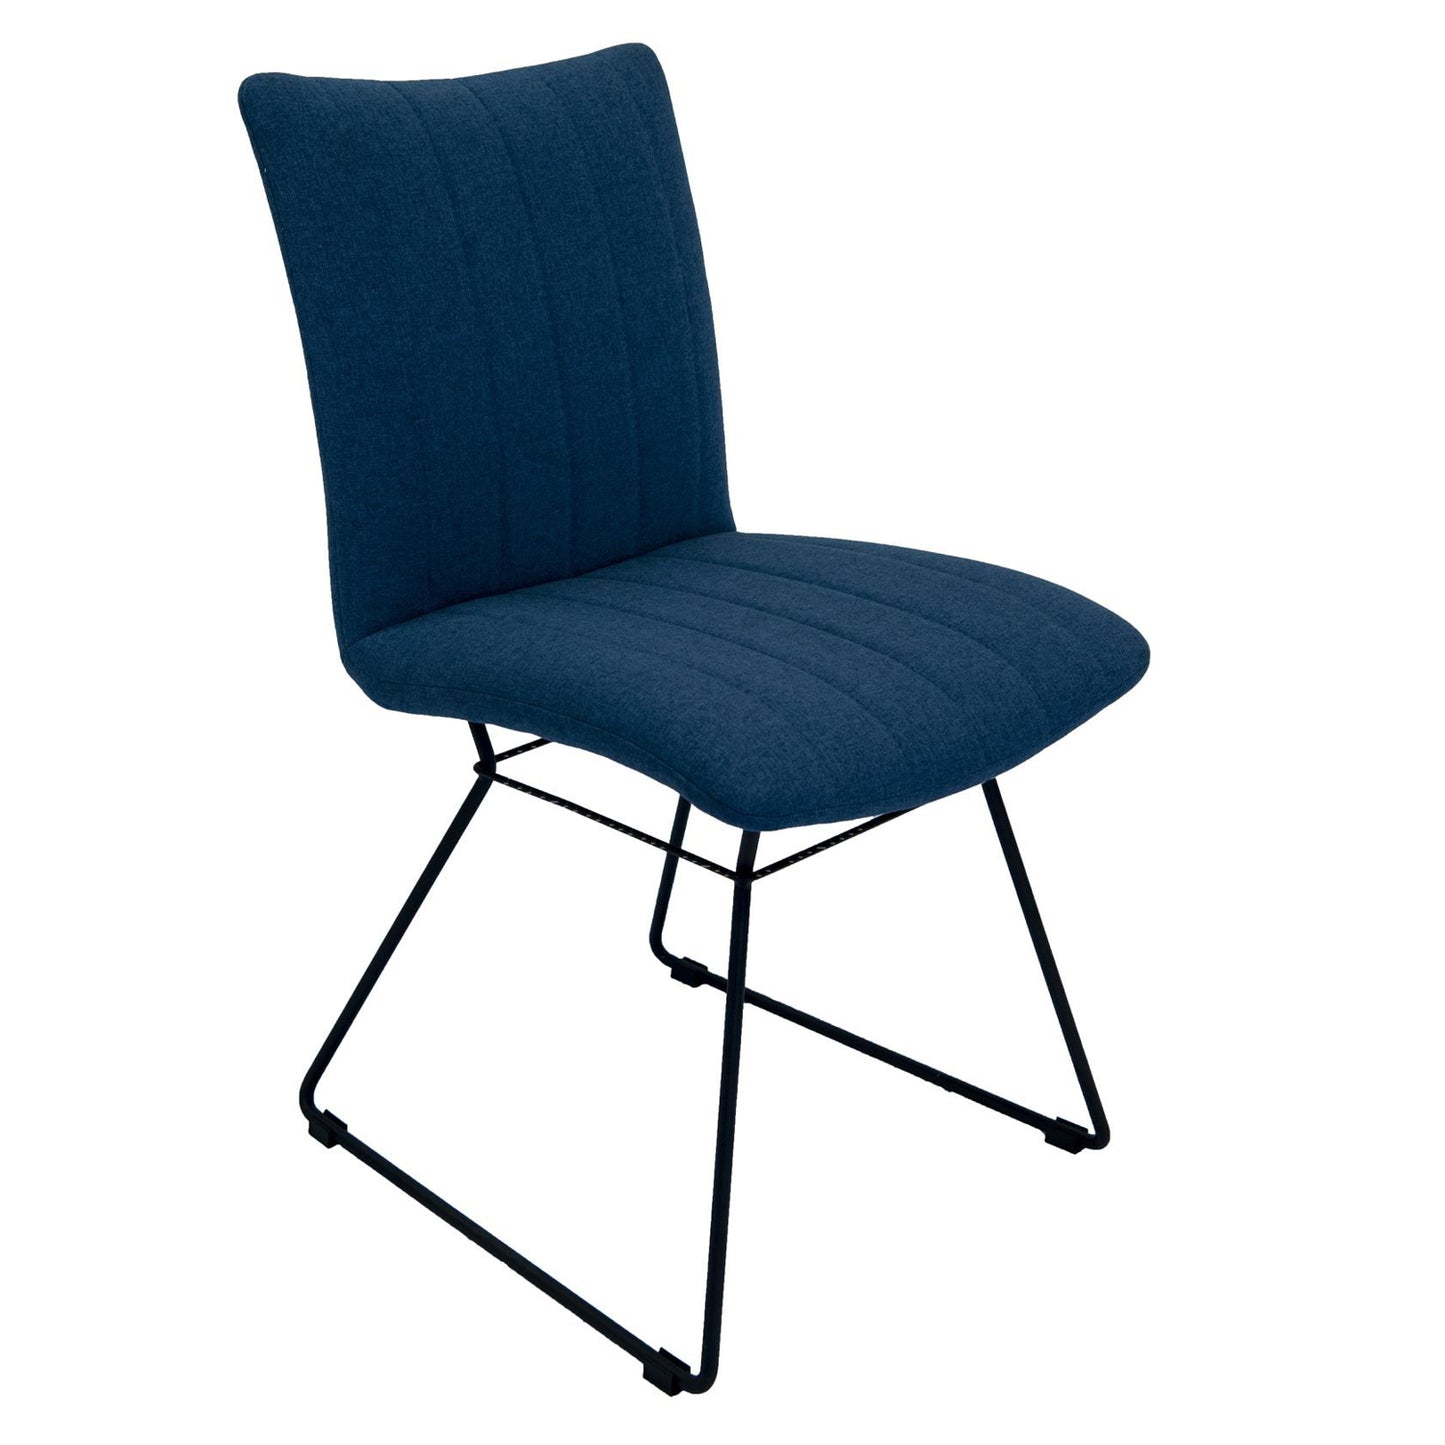 Wade Dining Chair - Mineral Blue